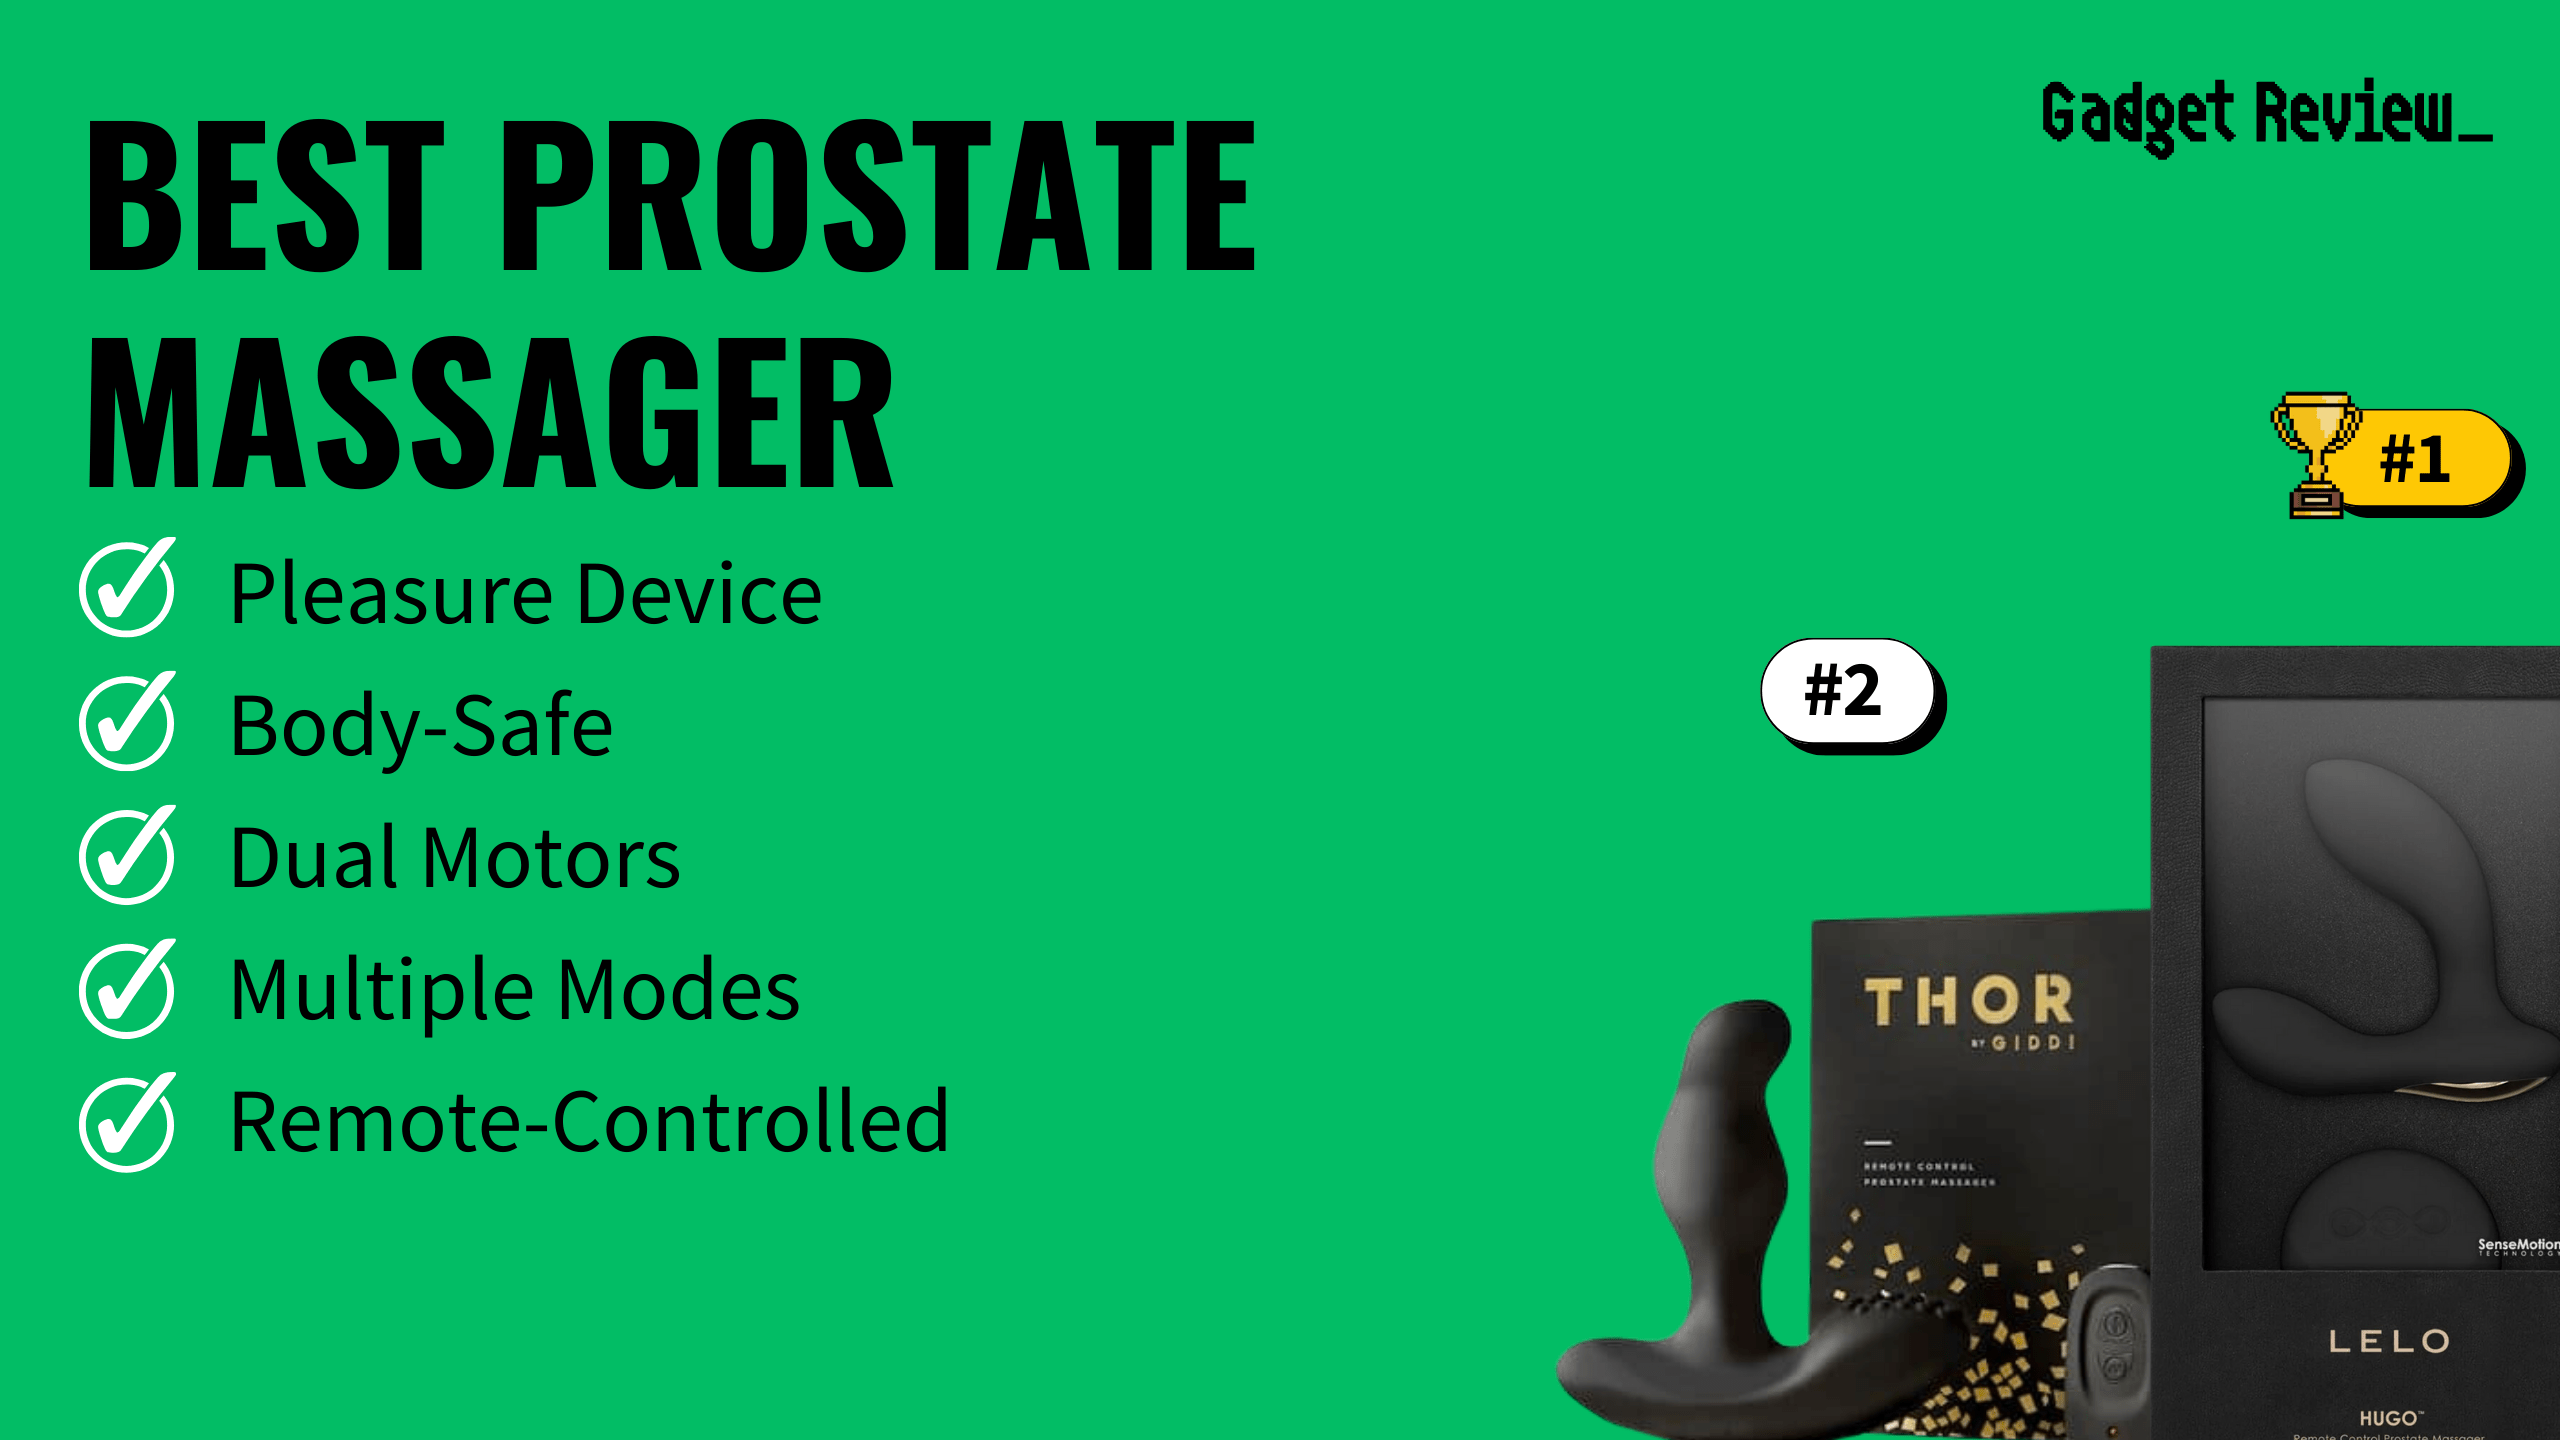 best prostate massager featured image that shows the top three best health & wellnes models